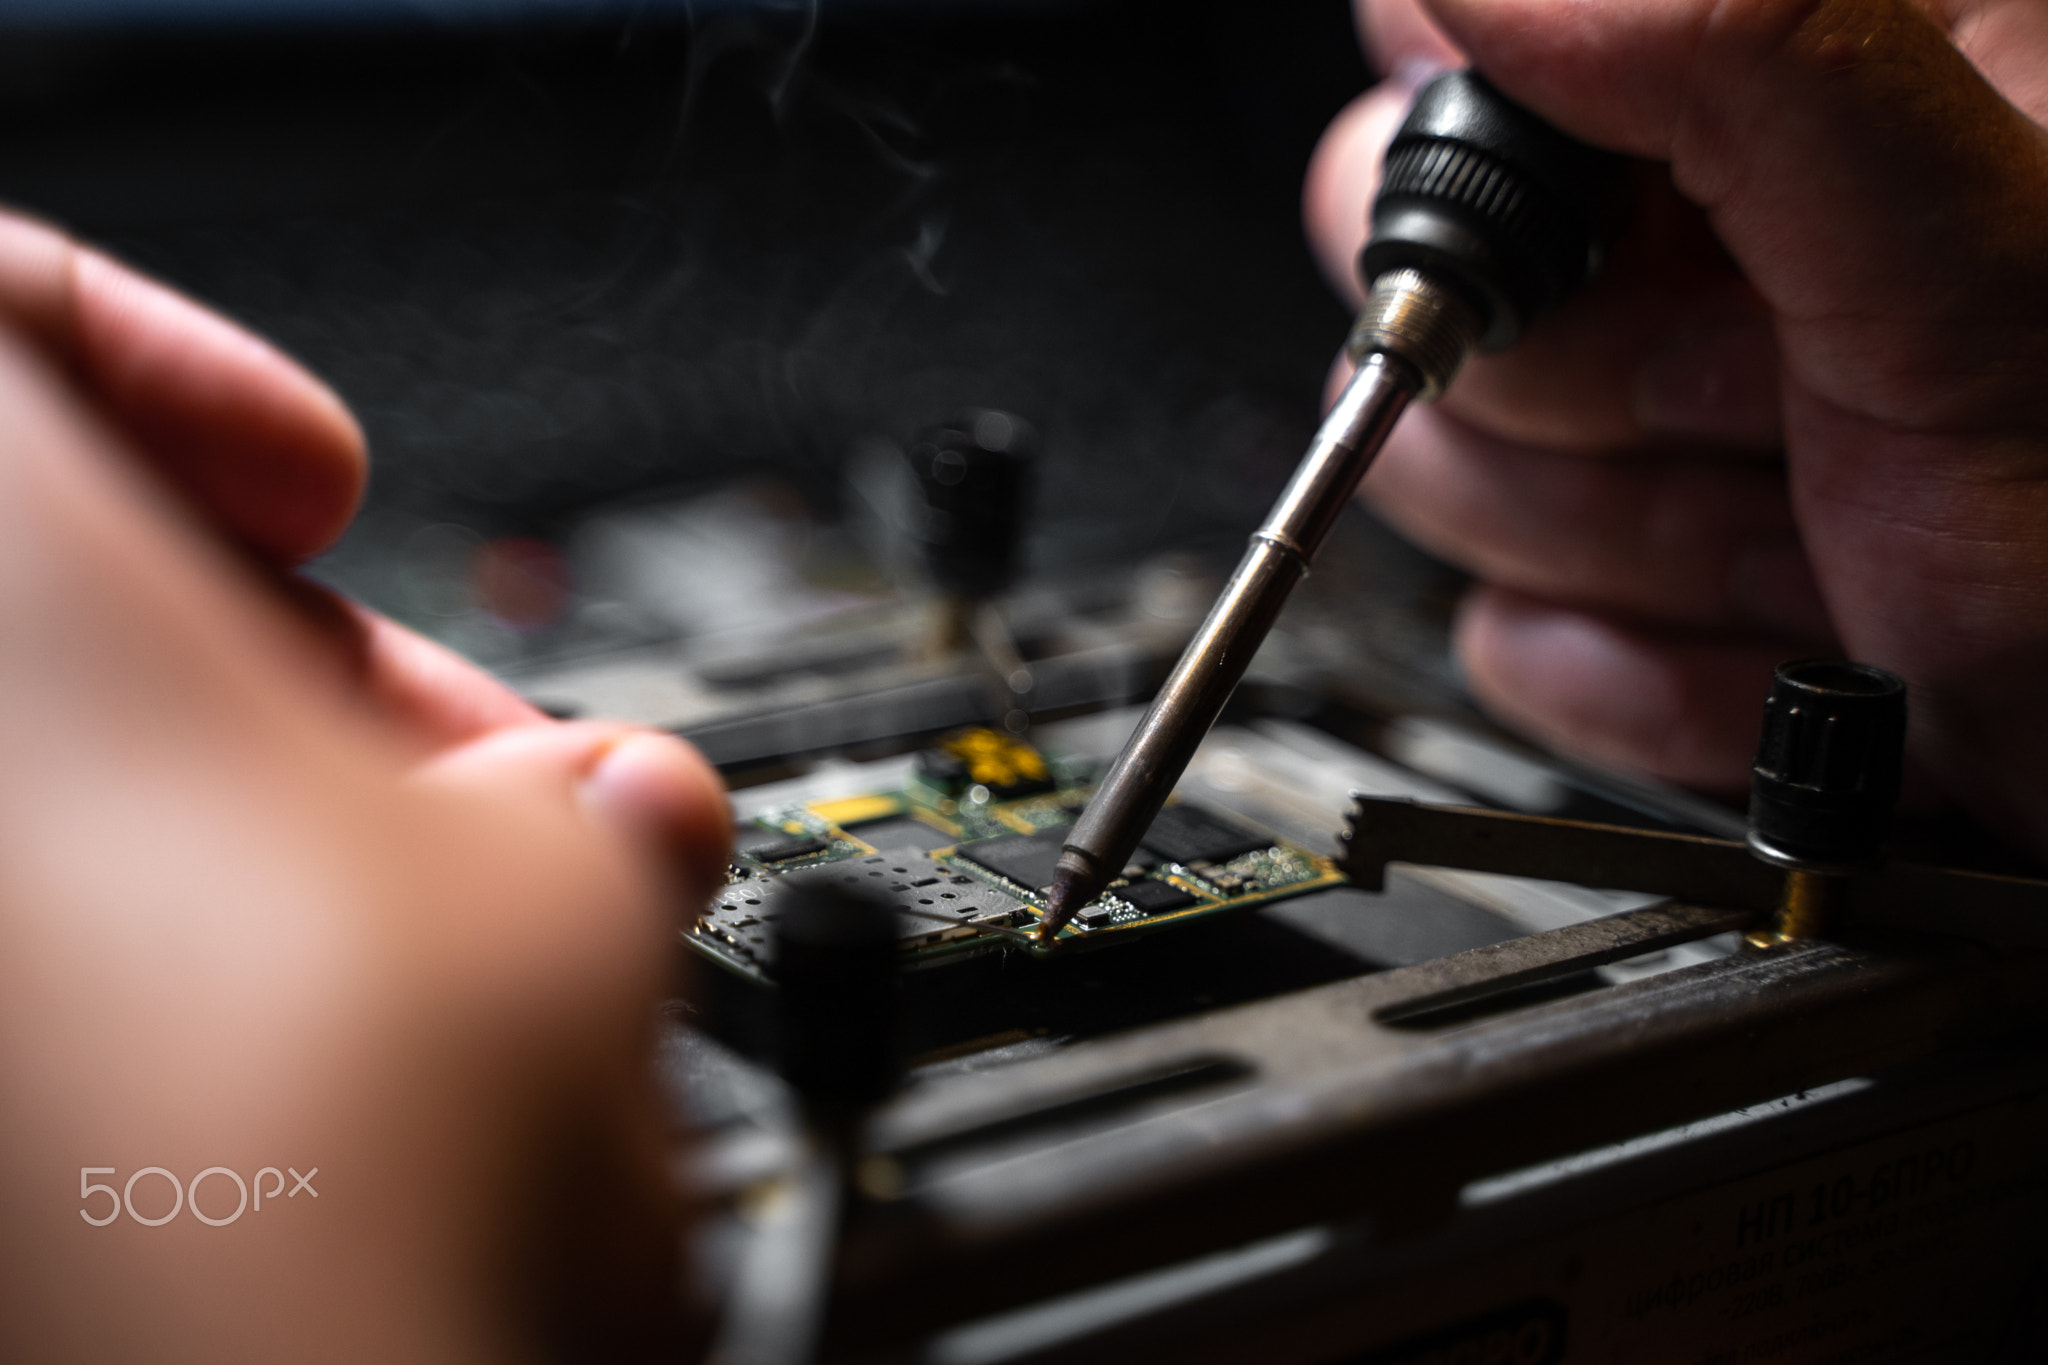 Soldering iron board of electronic device on the table, hands close up